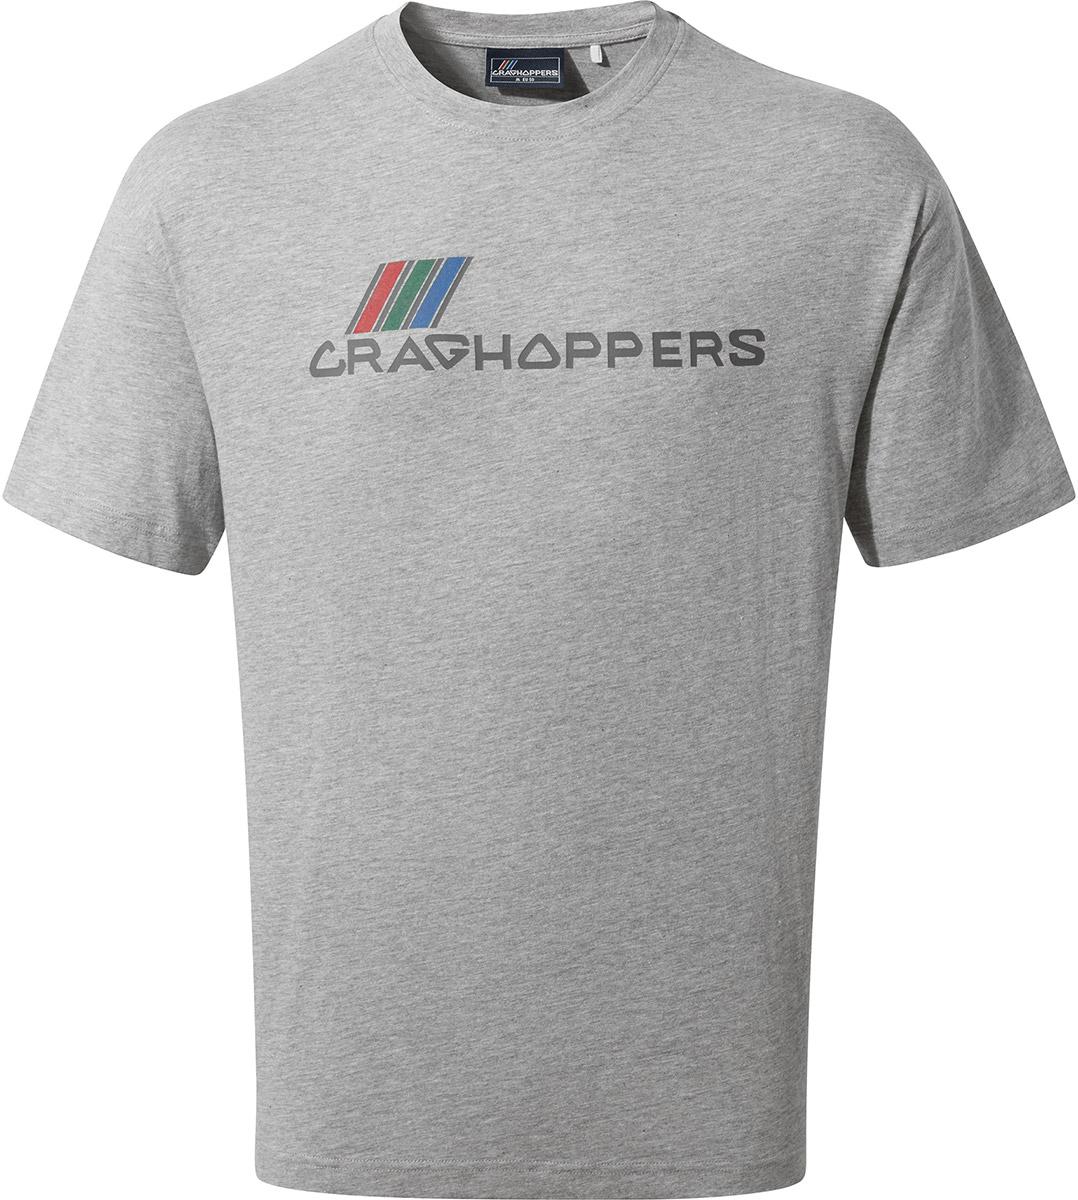 Image of Craghoppers Crosby Short Sleeve T-Shirt - Soft Grey Marl Large Archive